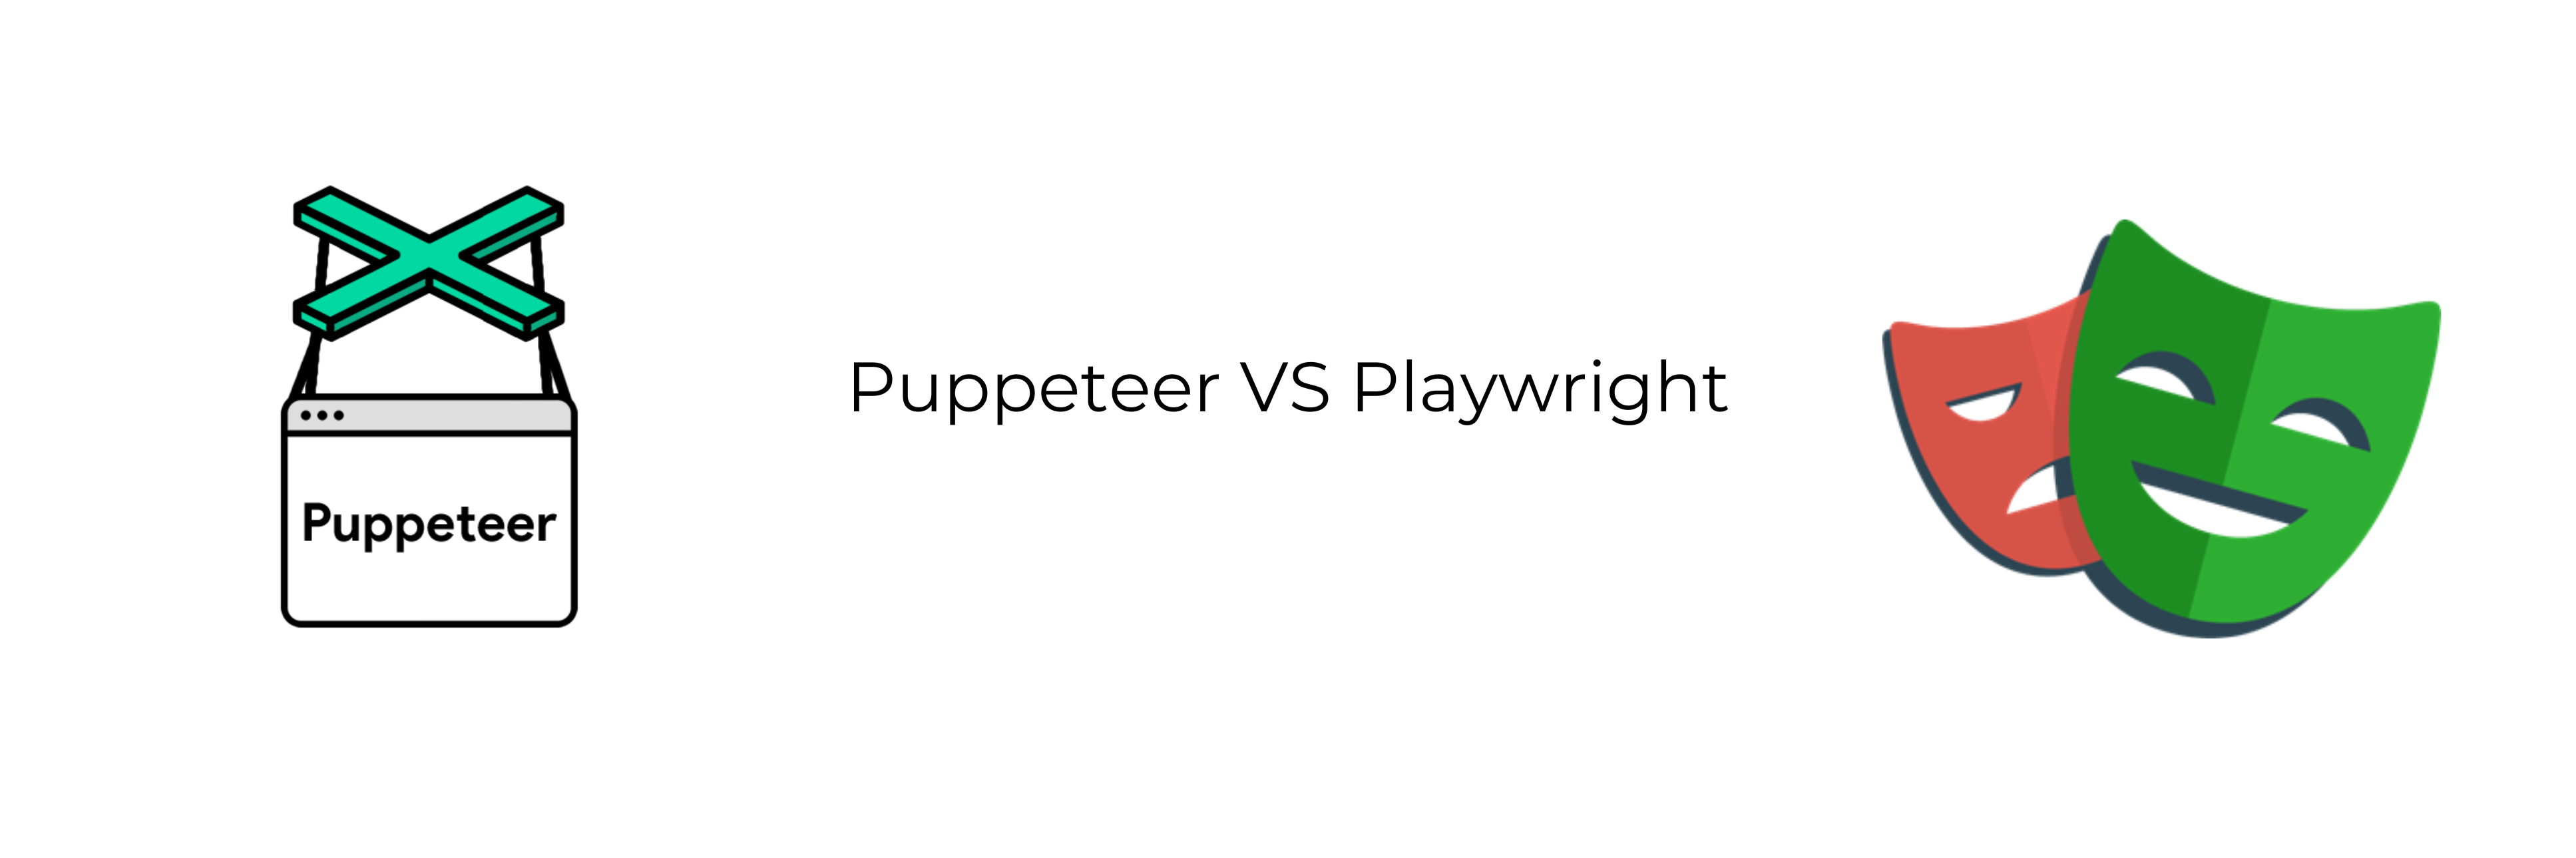 puppeteer and playwright